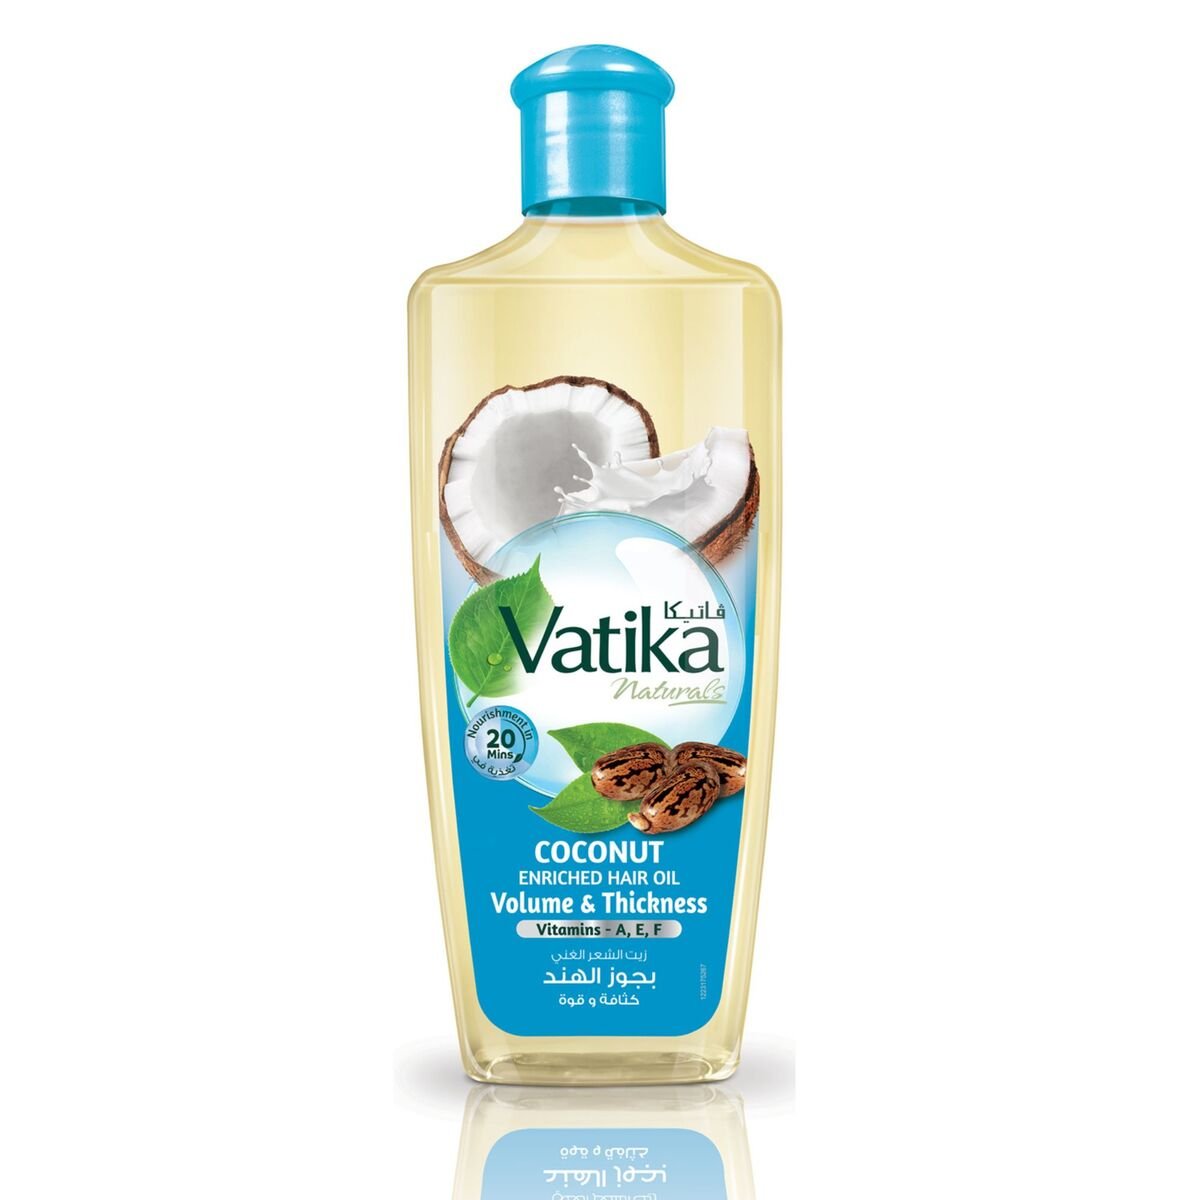 Vatika Naturals Coconut Enriched Hair Oil Volume & Thickness 300 ml